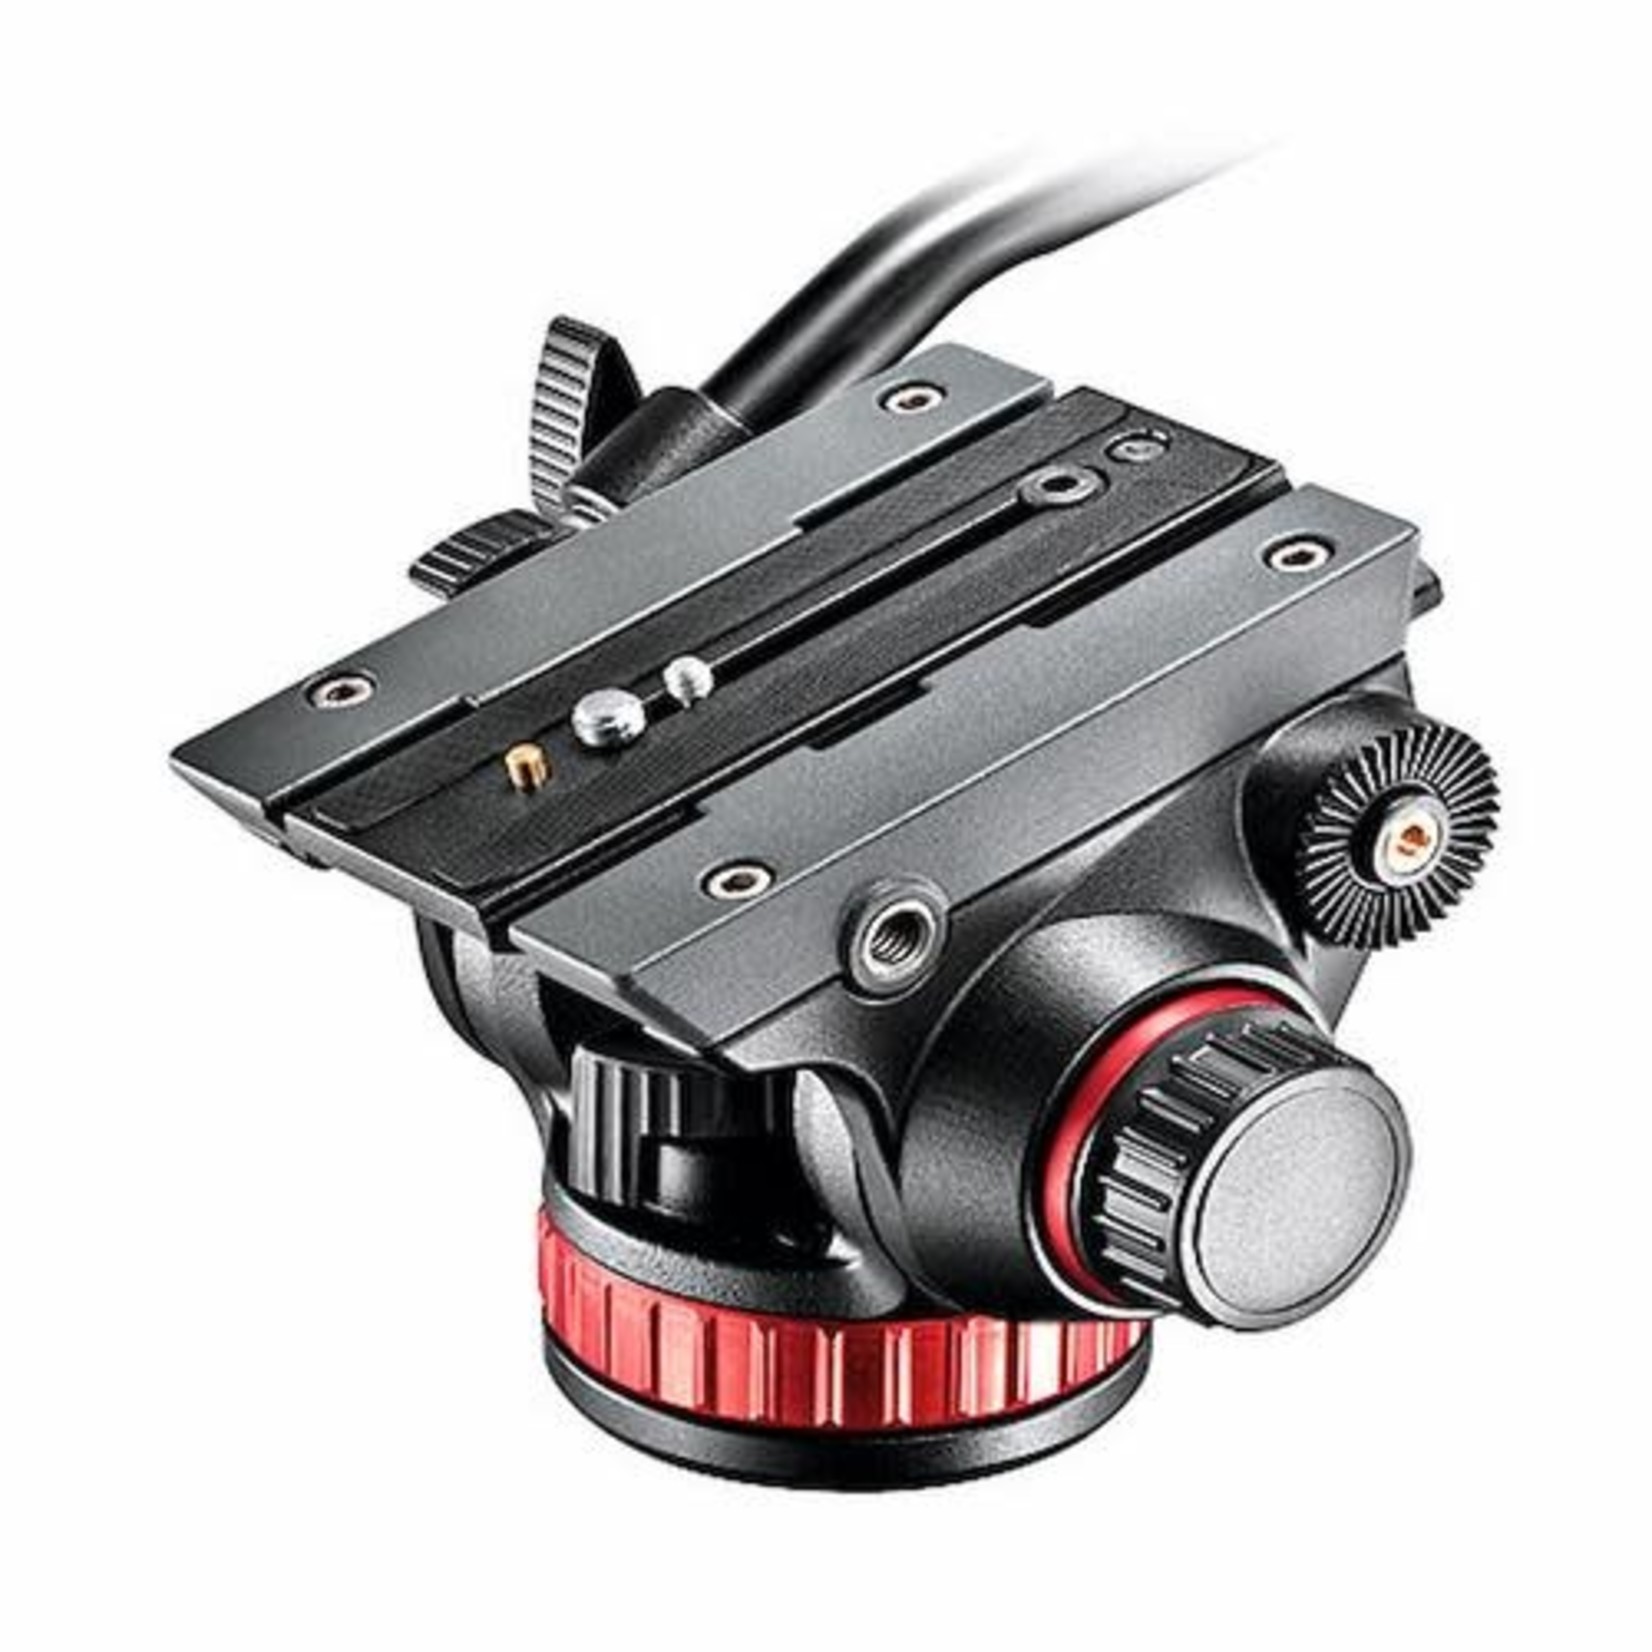 Manfrotto Manfrotto MVH502AH Pro Video Head w/Flat Base